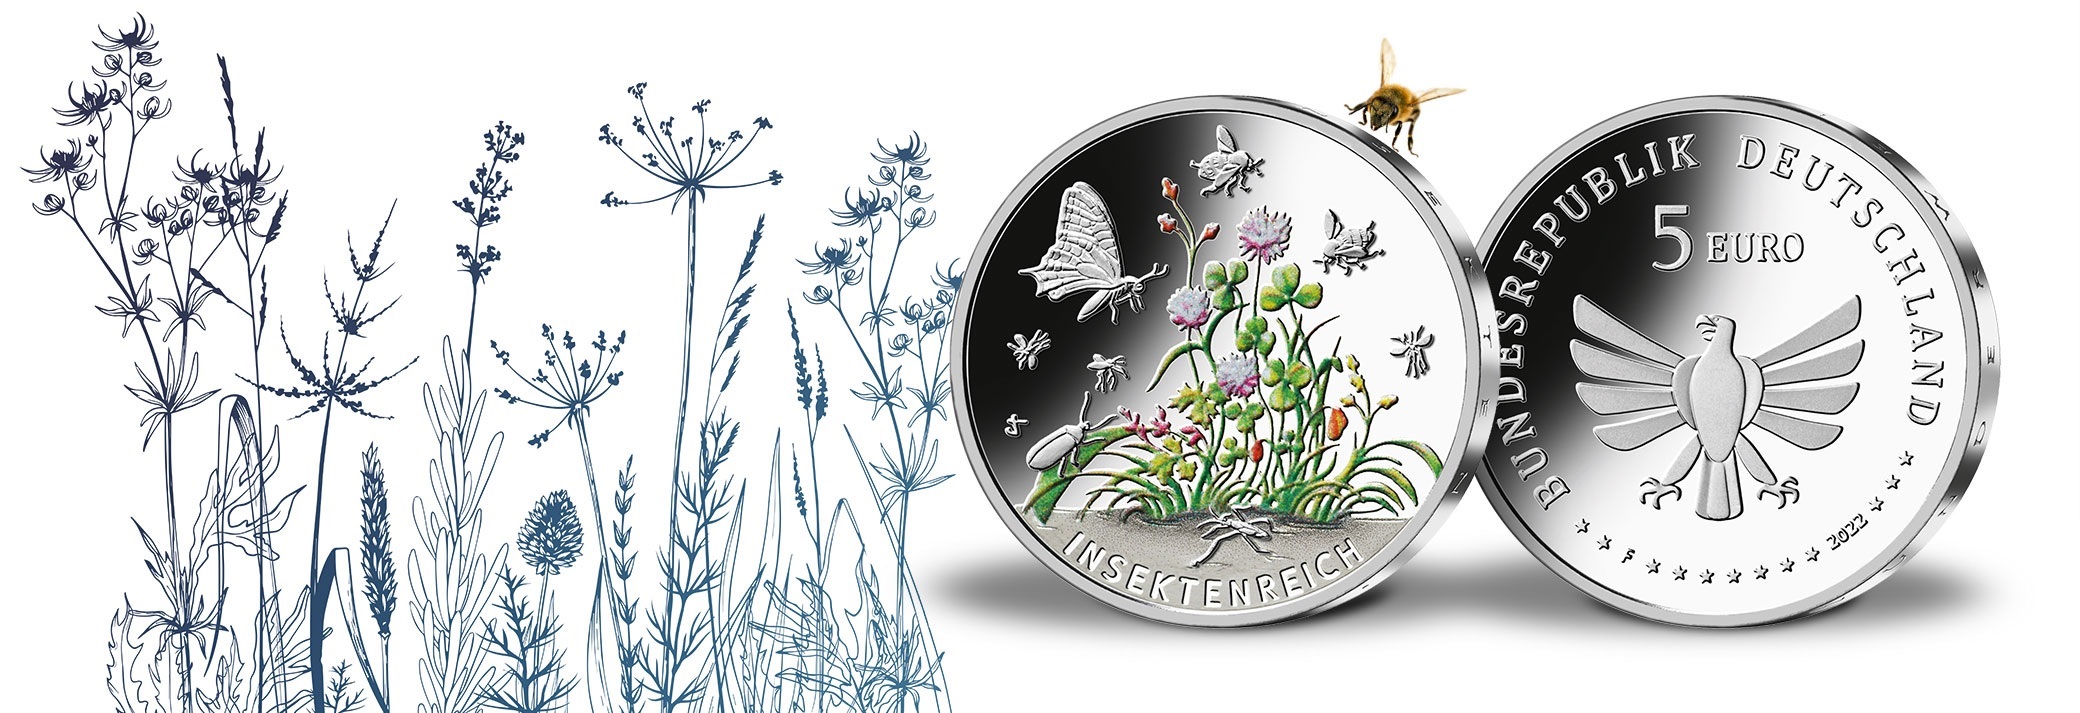 (EUR03.Proof.2022.90N122Q4S5) 5 € Germany 2022 F Proof Ag - Kingdom of insects (blog illustration) (zoom)